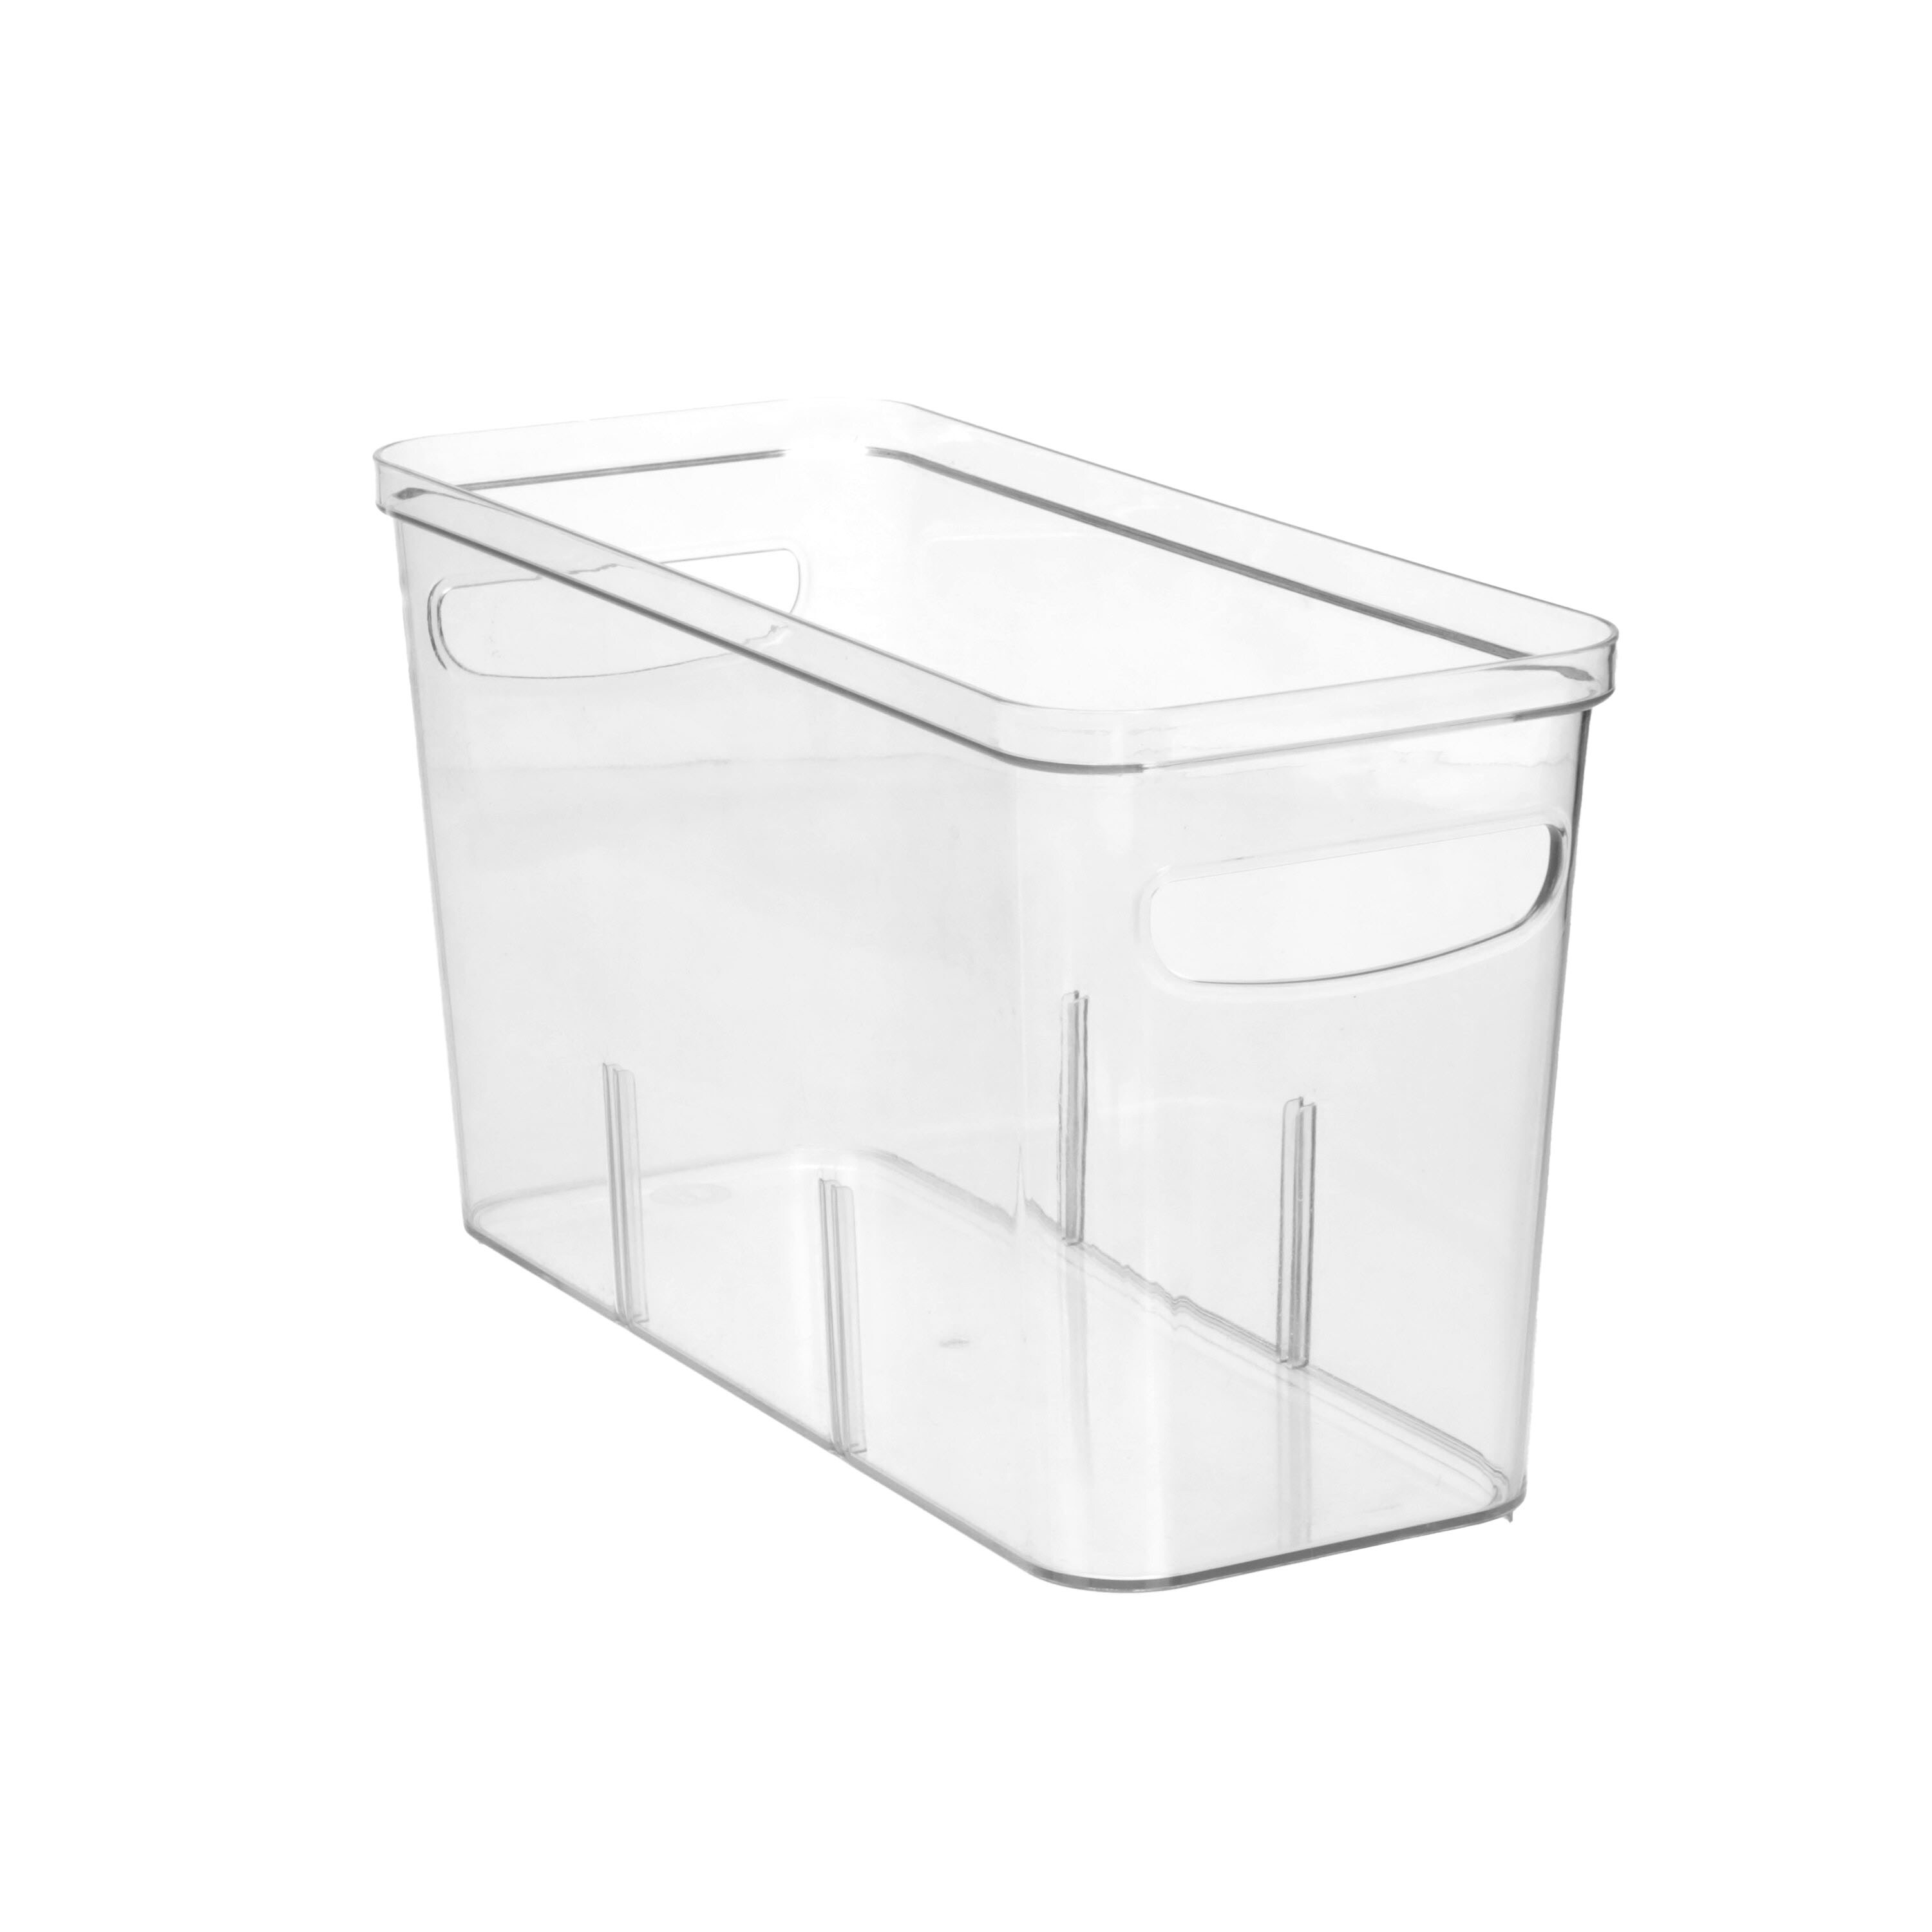 4 Layers Clear Food Tray   Storage Box Durable Food-Grade Container Holder 